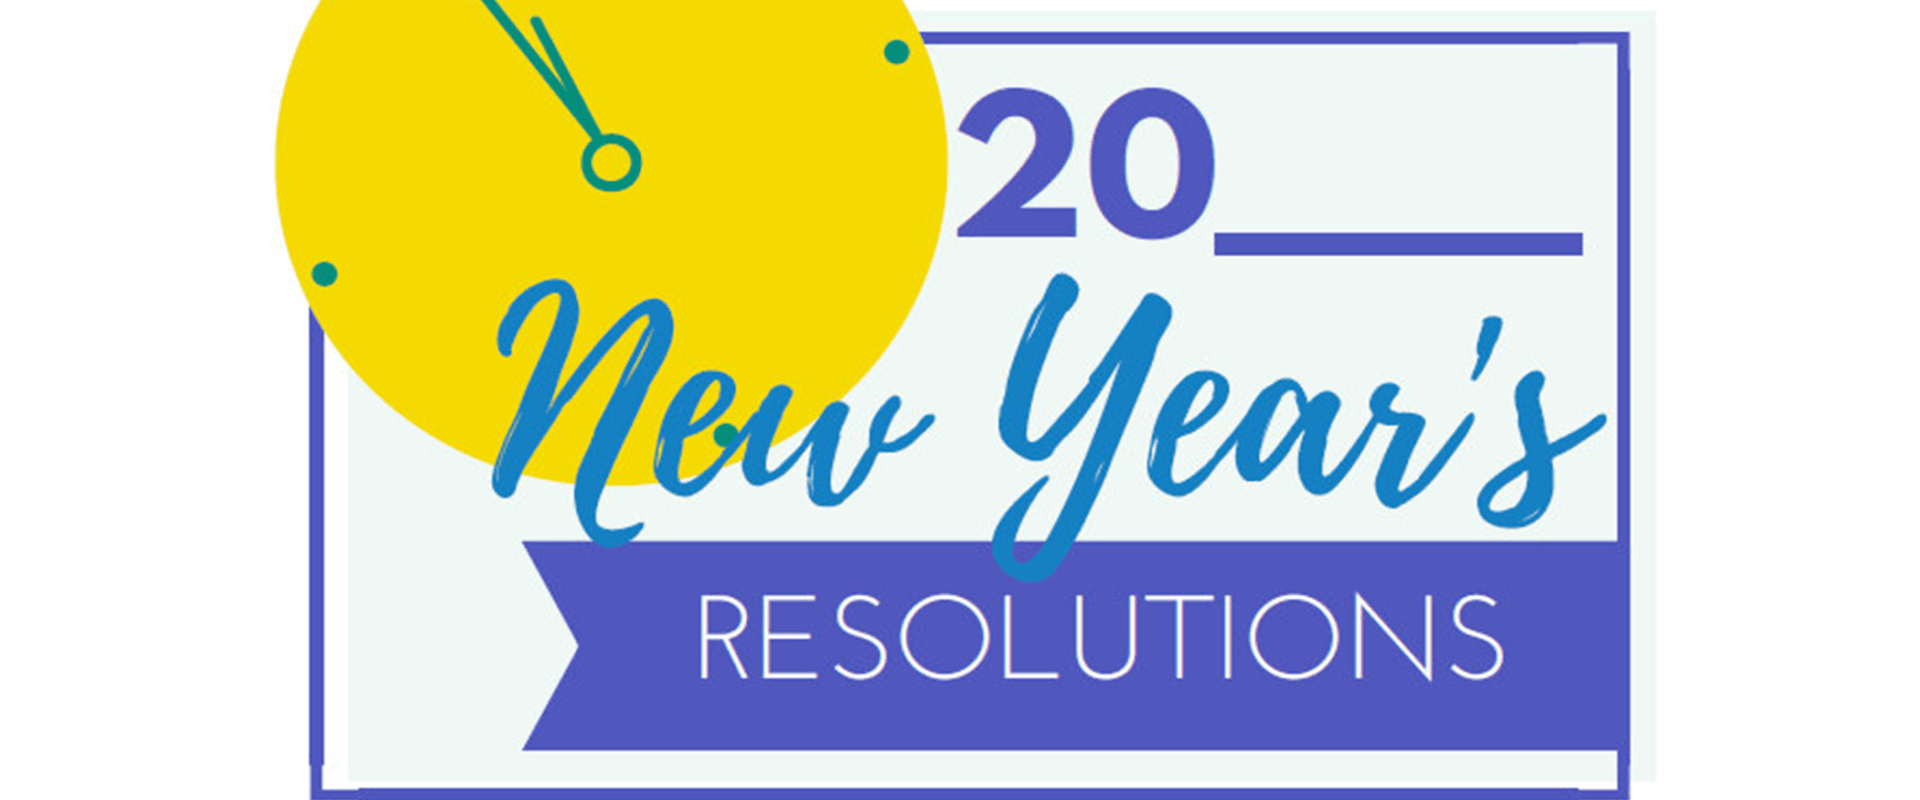 Level up your personal finance and create some financial resolutions in 2019 that you will actually stick to! Here’s a list of great ideas that will help you create New Year’s financial goals that you’ll actually achieve this year.